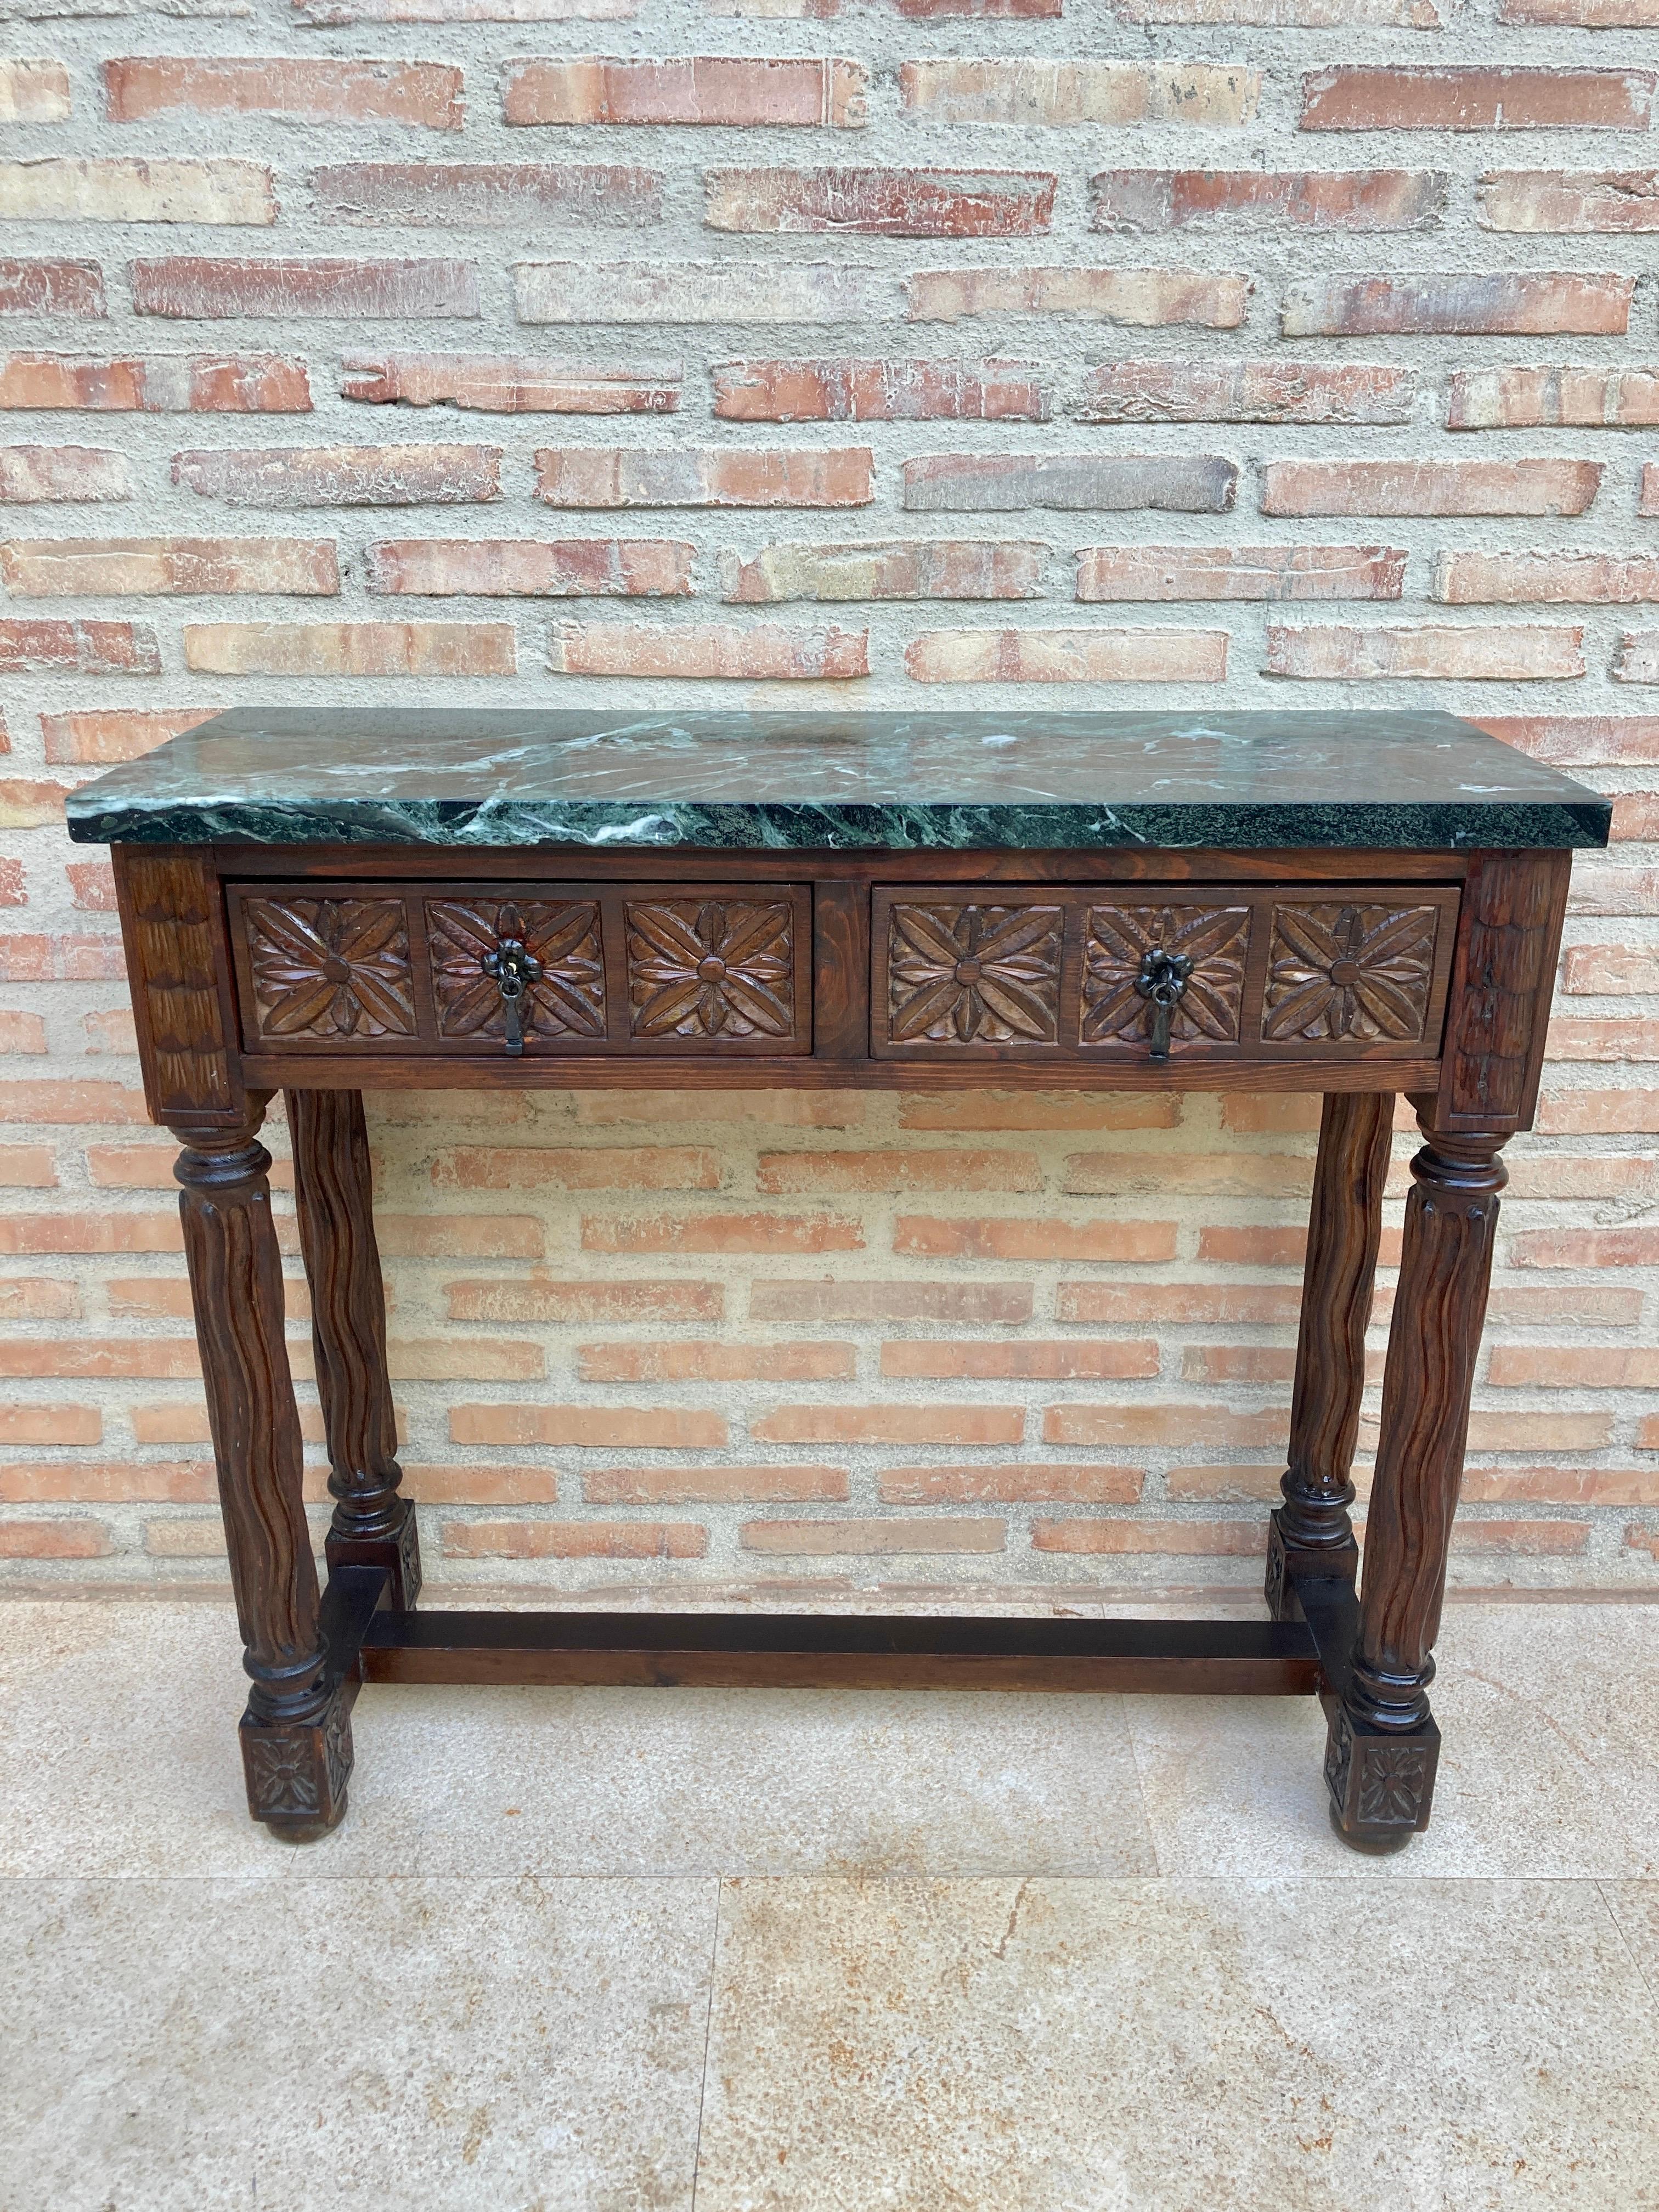 Early 20th century Spanish carved walnut console table with two drawers and green marble top.
This early 20th century Spanish Console table has two carved drawers with black wrought iron handles and Solomonic hand carved twist legs joined by a